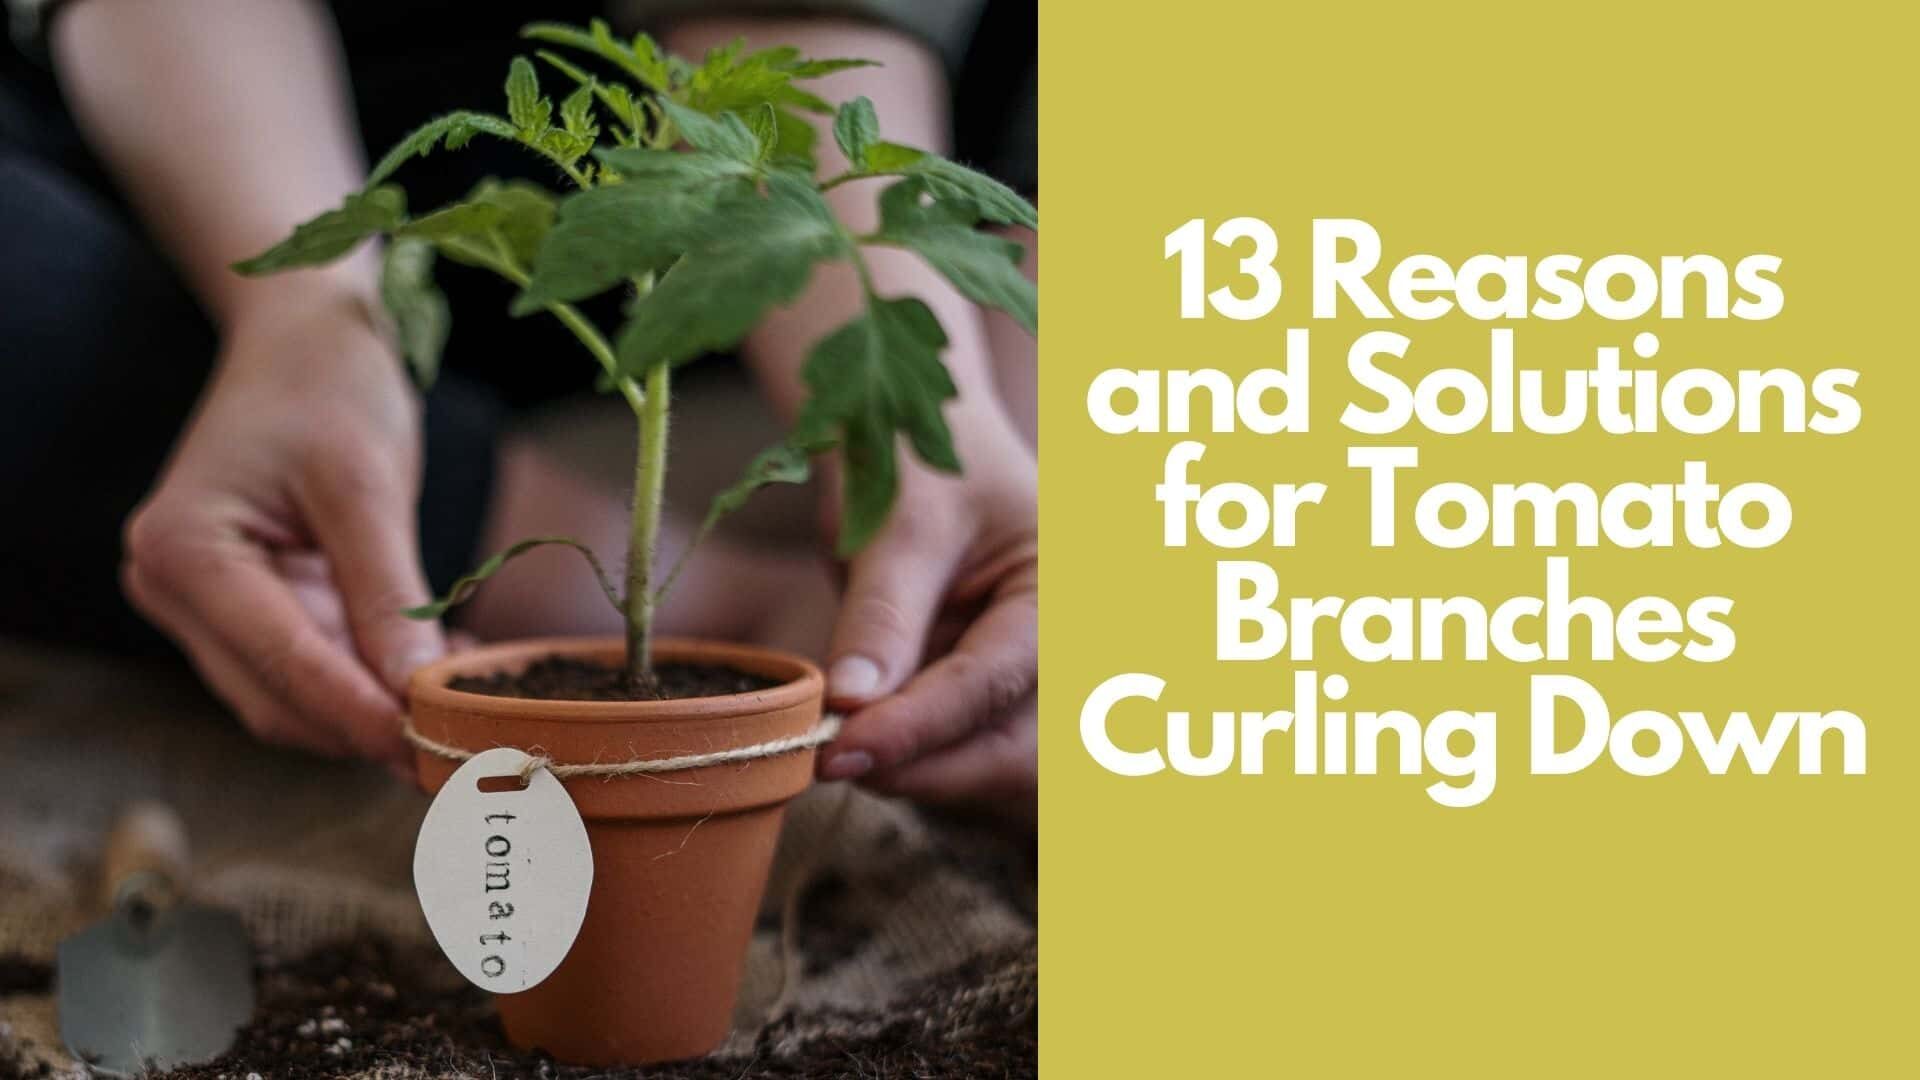 13 Reasons and Solutions for Tomato Branches Curling Down